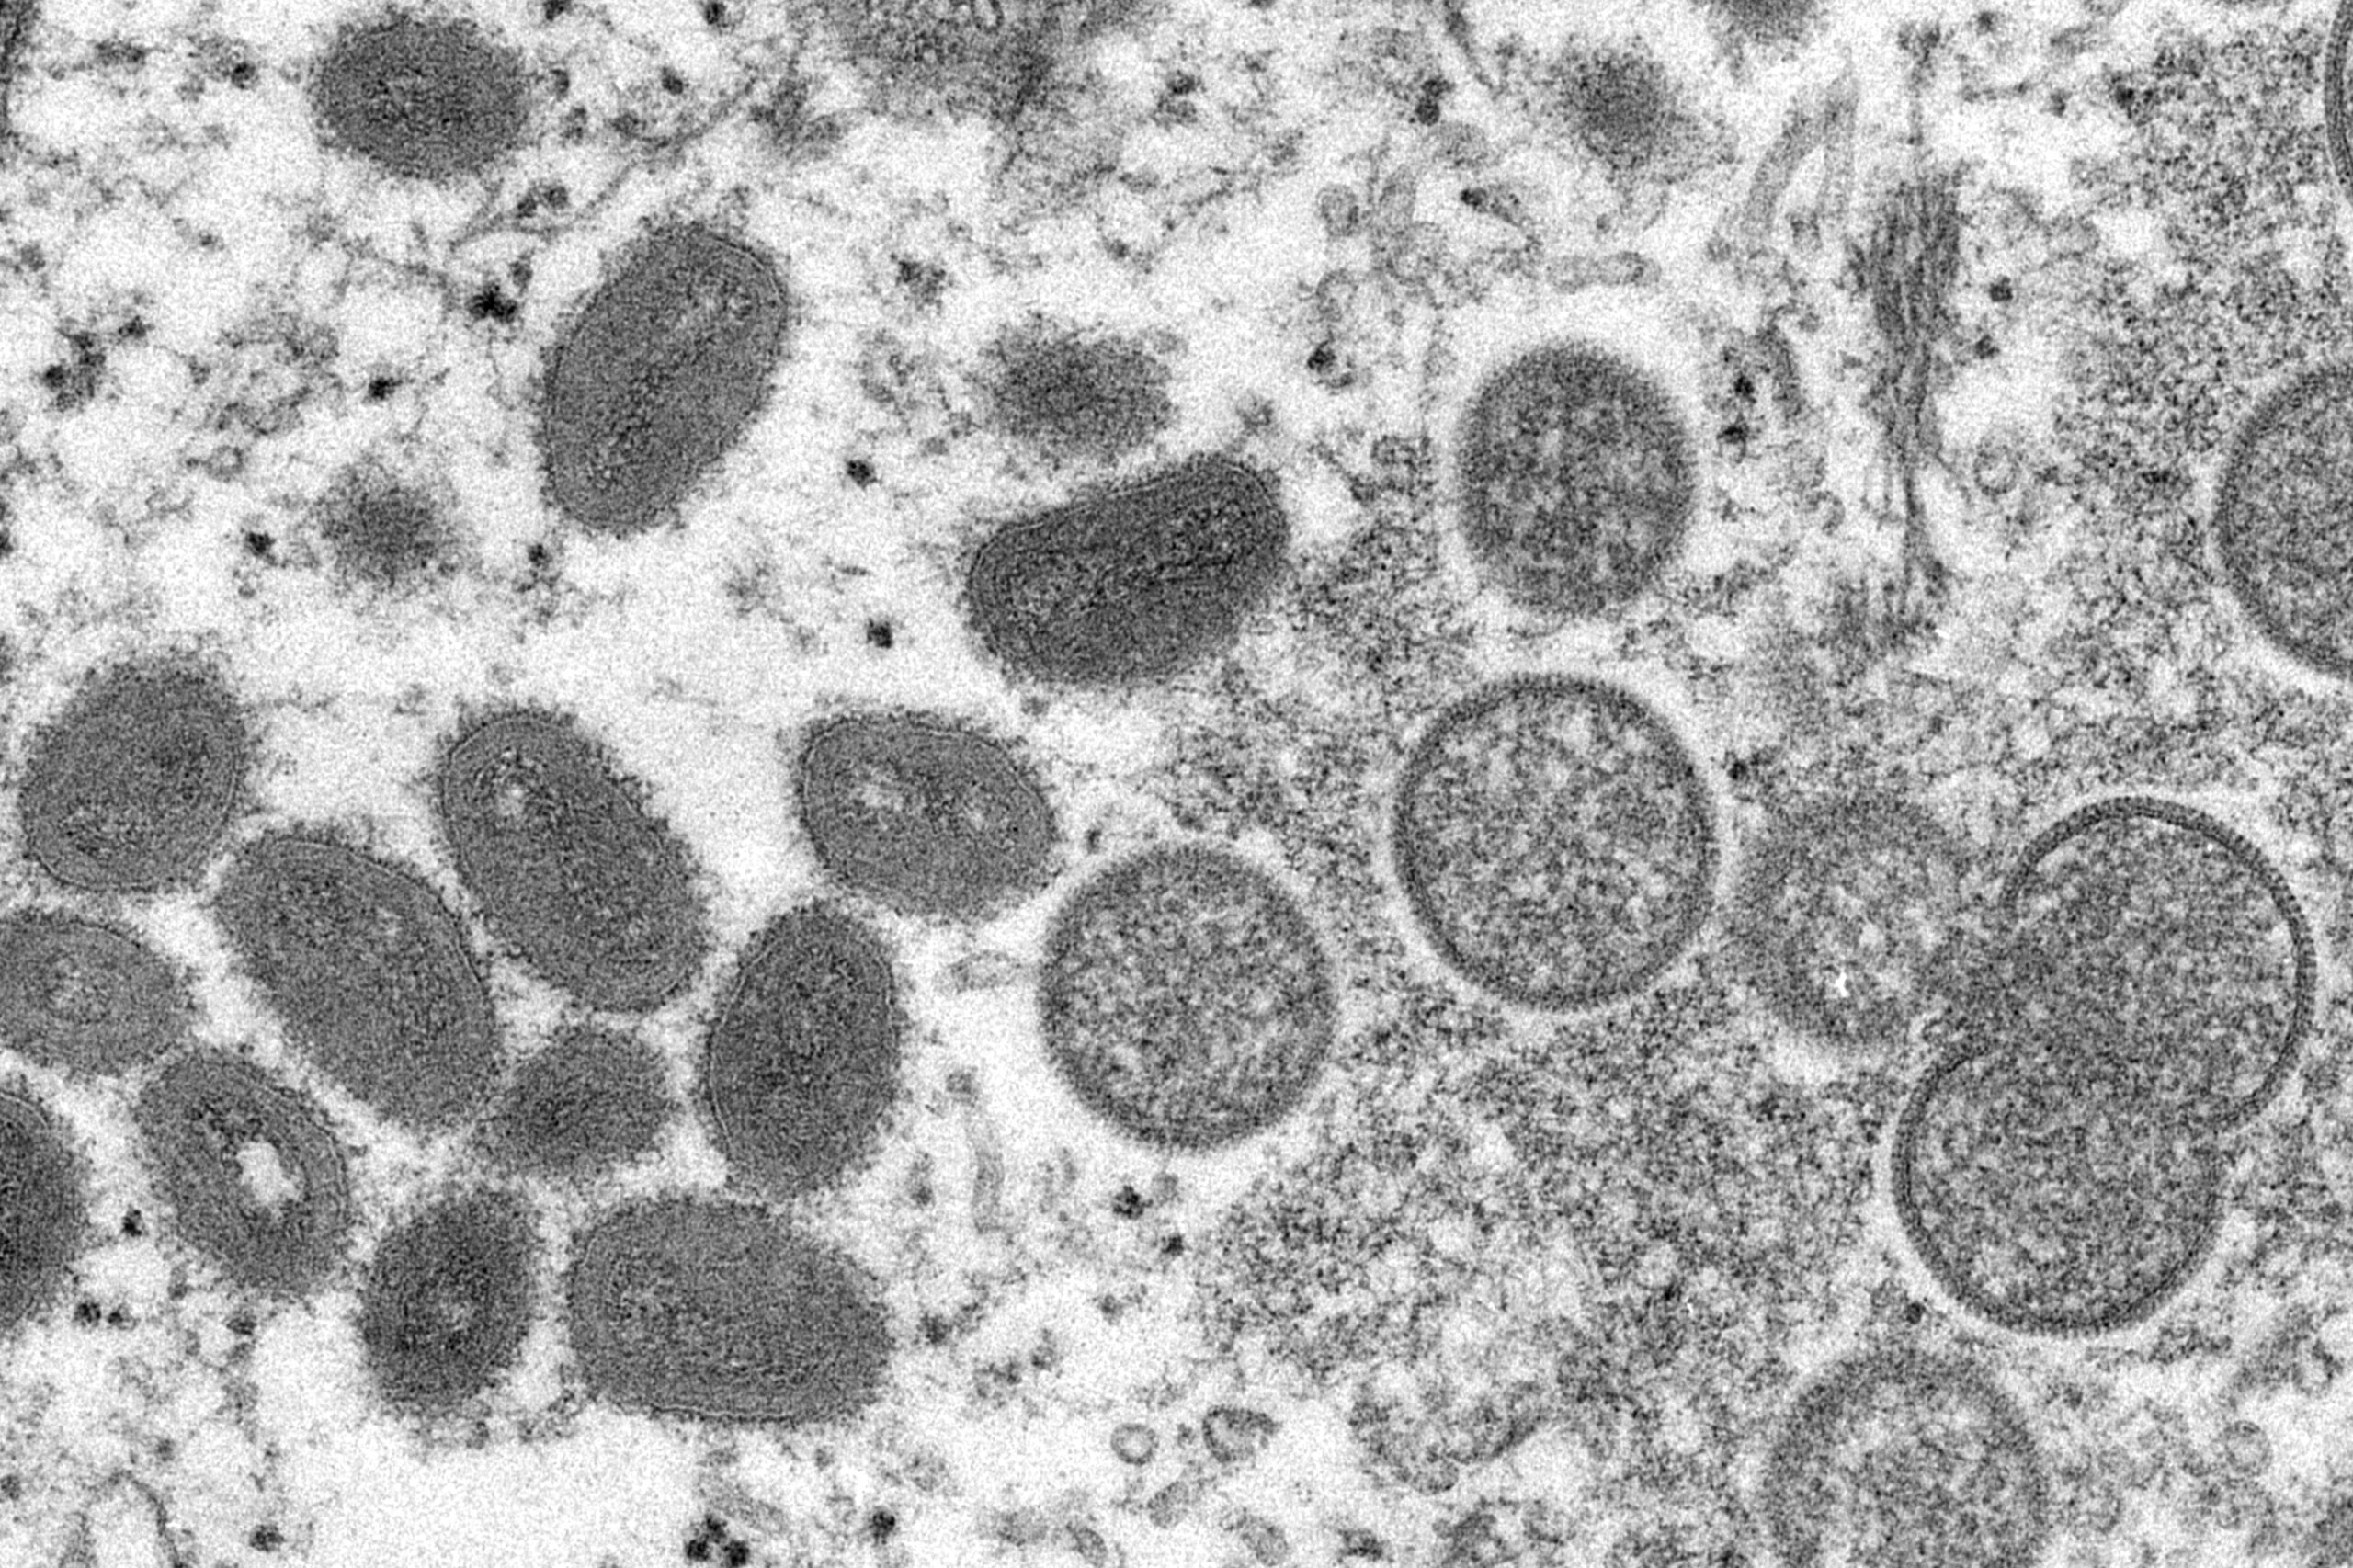 CDC: Community spread of monkeypox possible in current outbreak